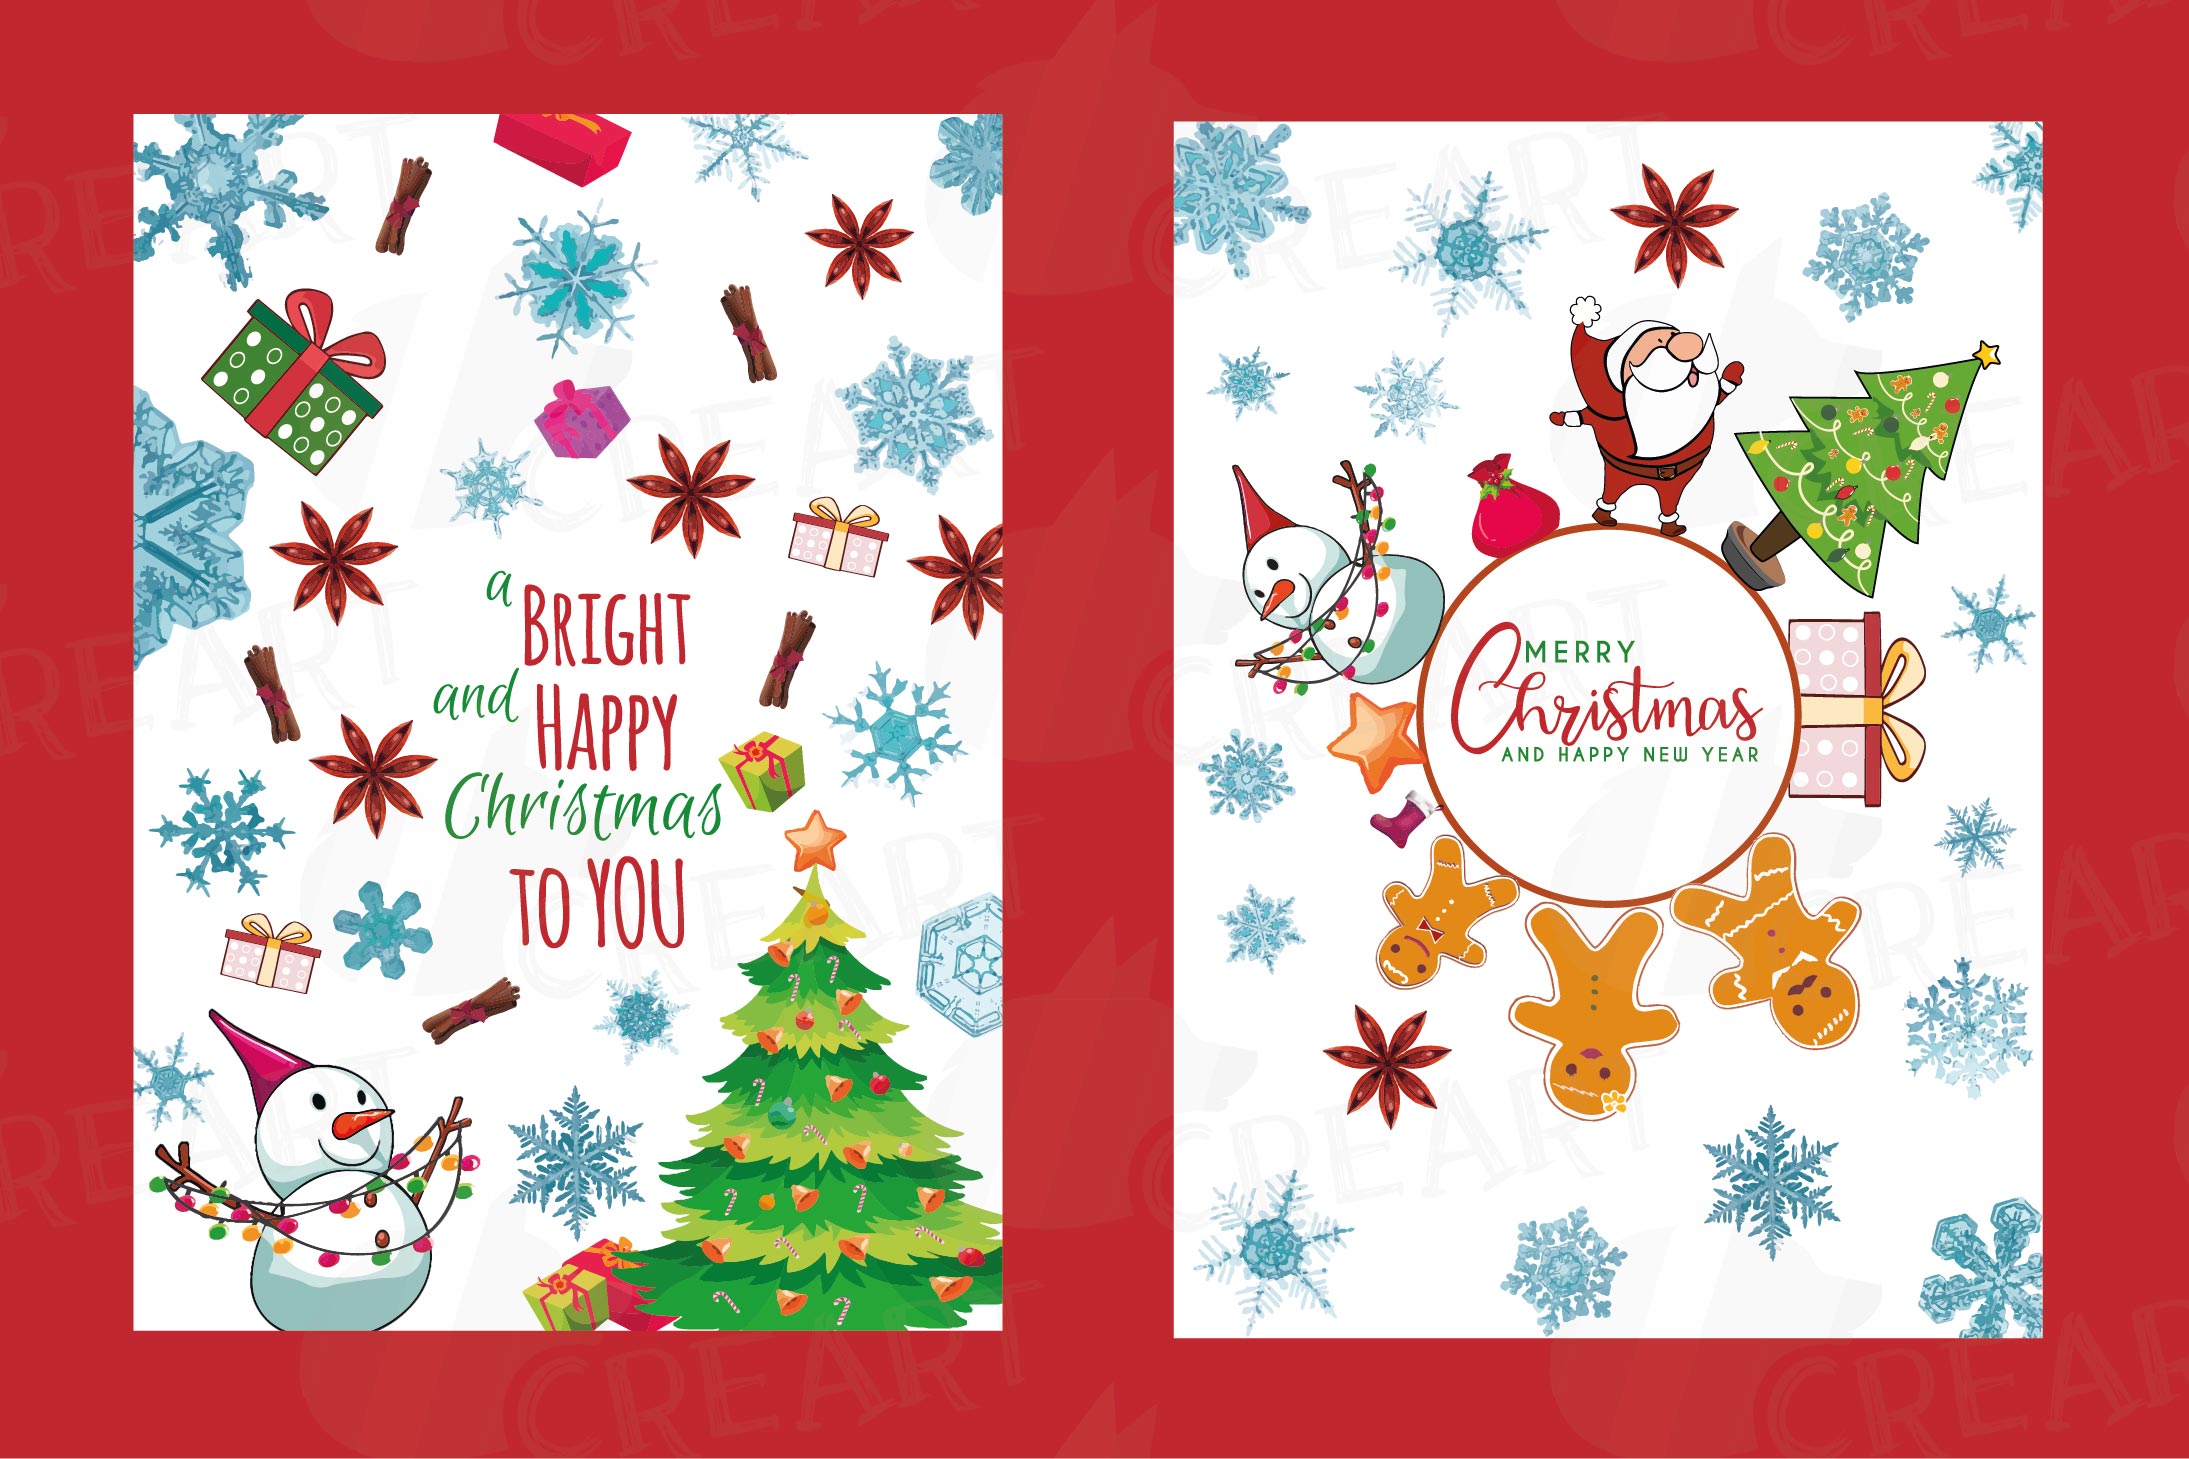 50 Merry Christmas Wishes For Clients